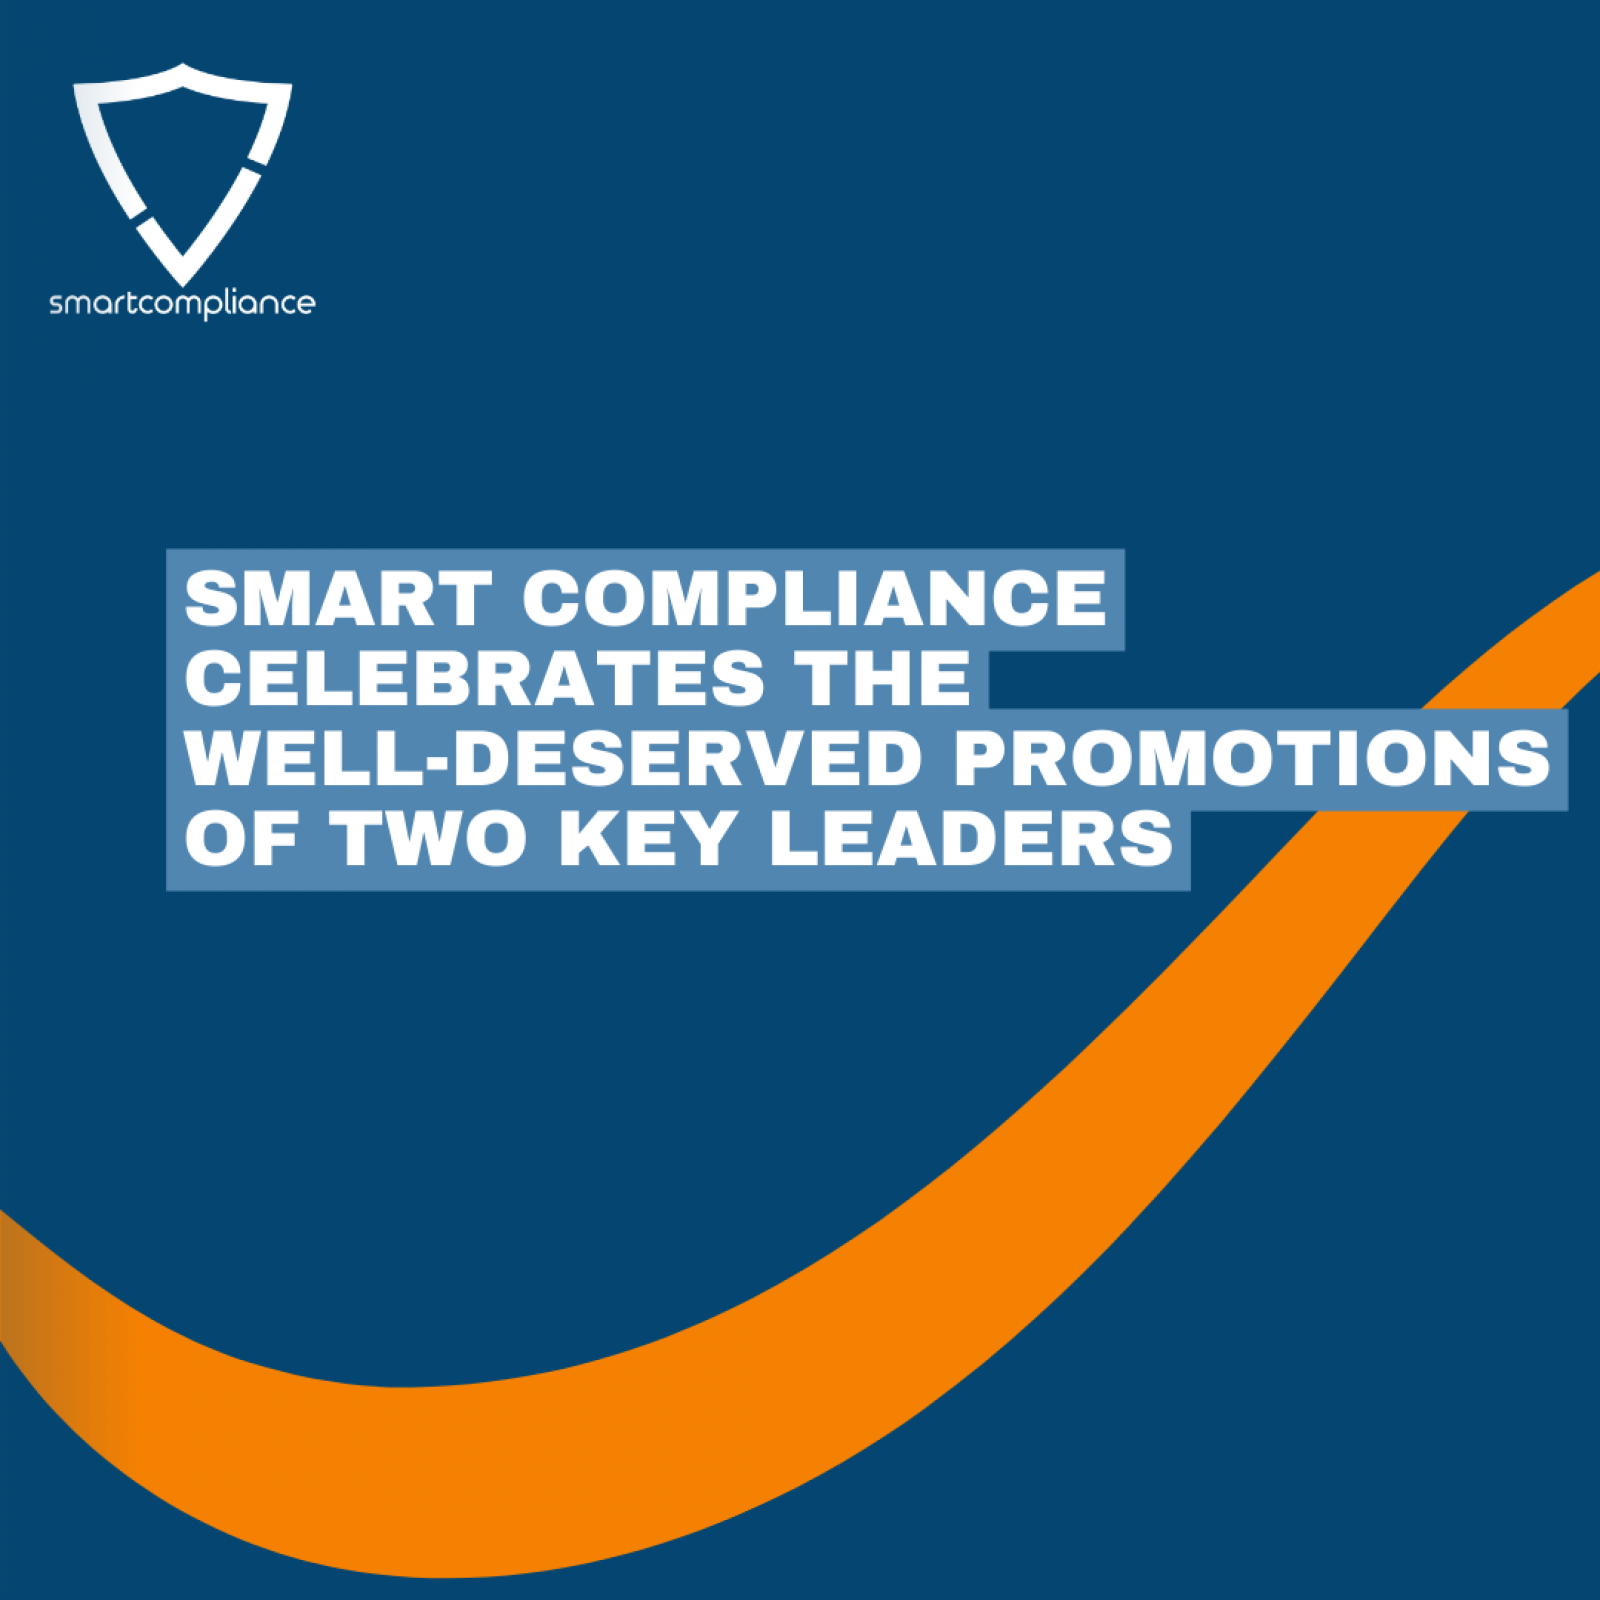 Smart Compliance Celebrates the Well-Deserved Promotions of Two Key Leaders